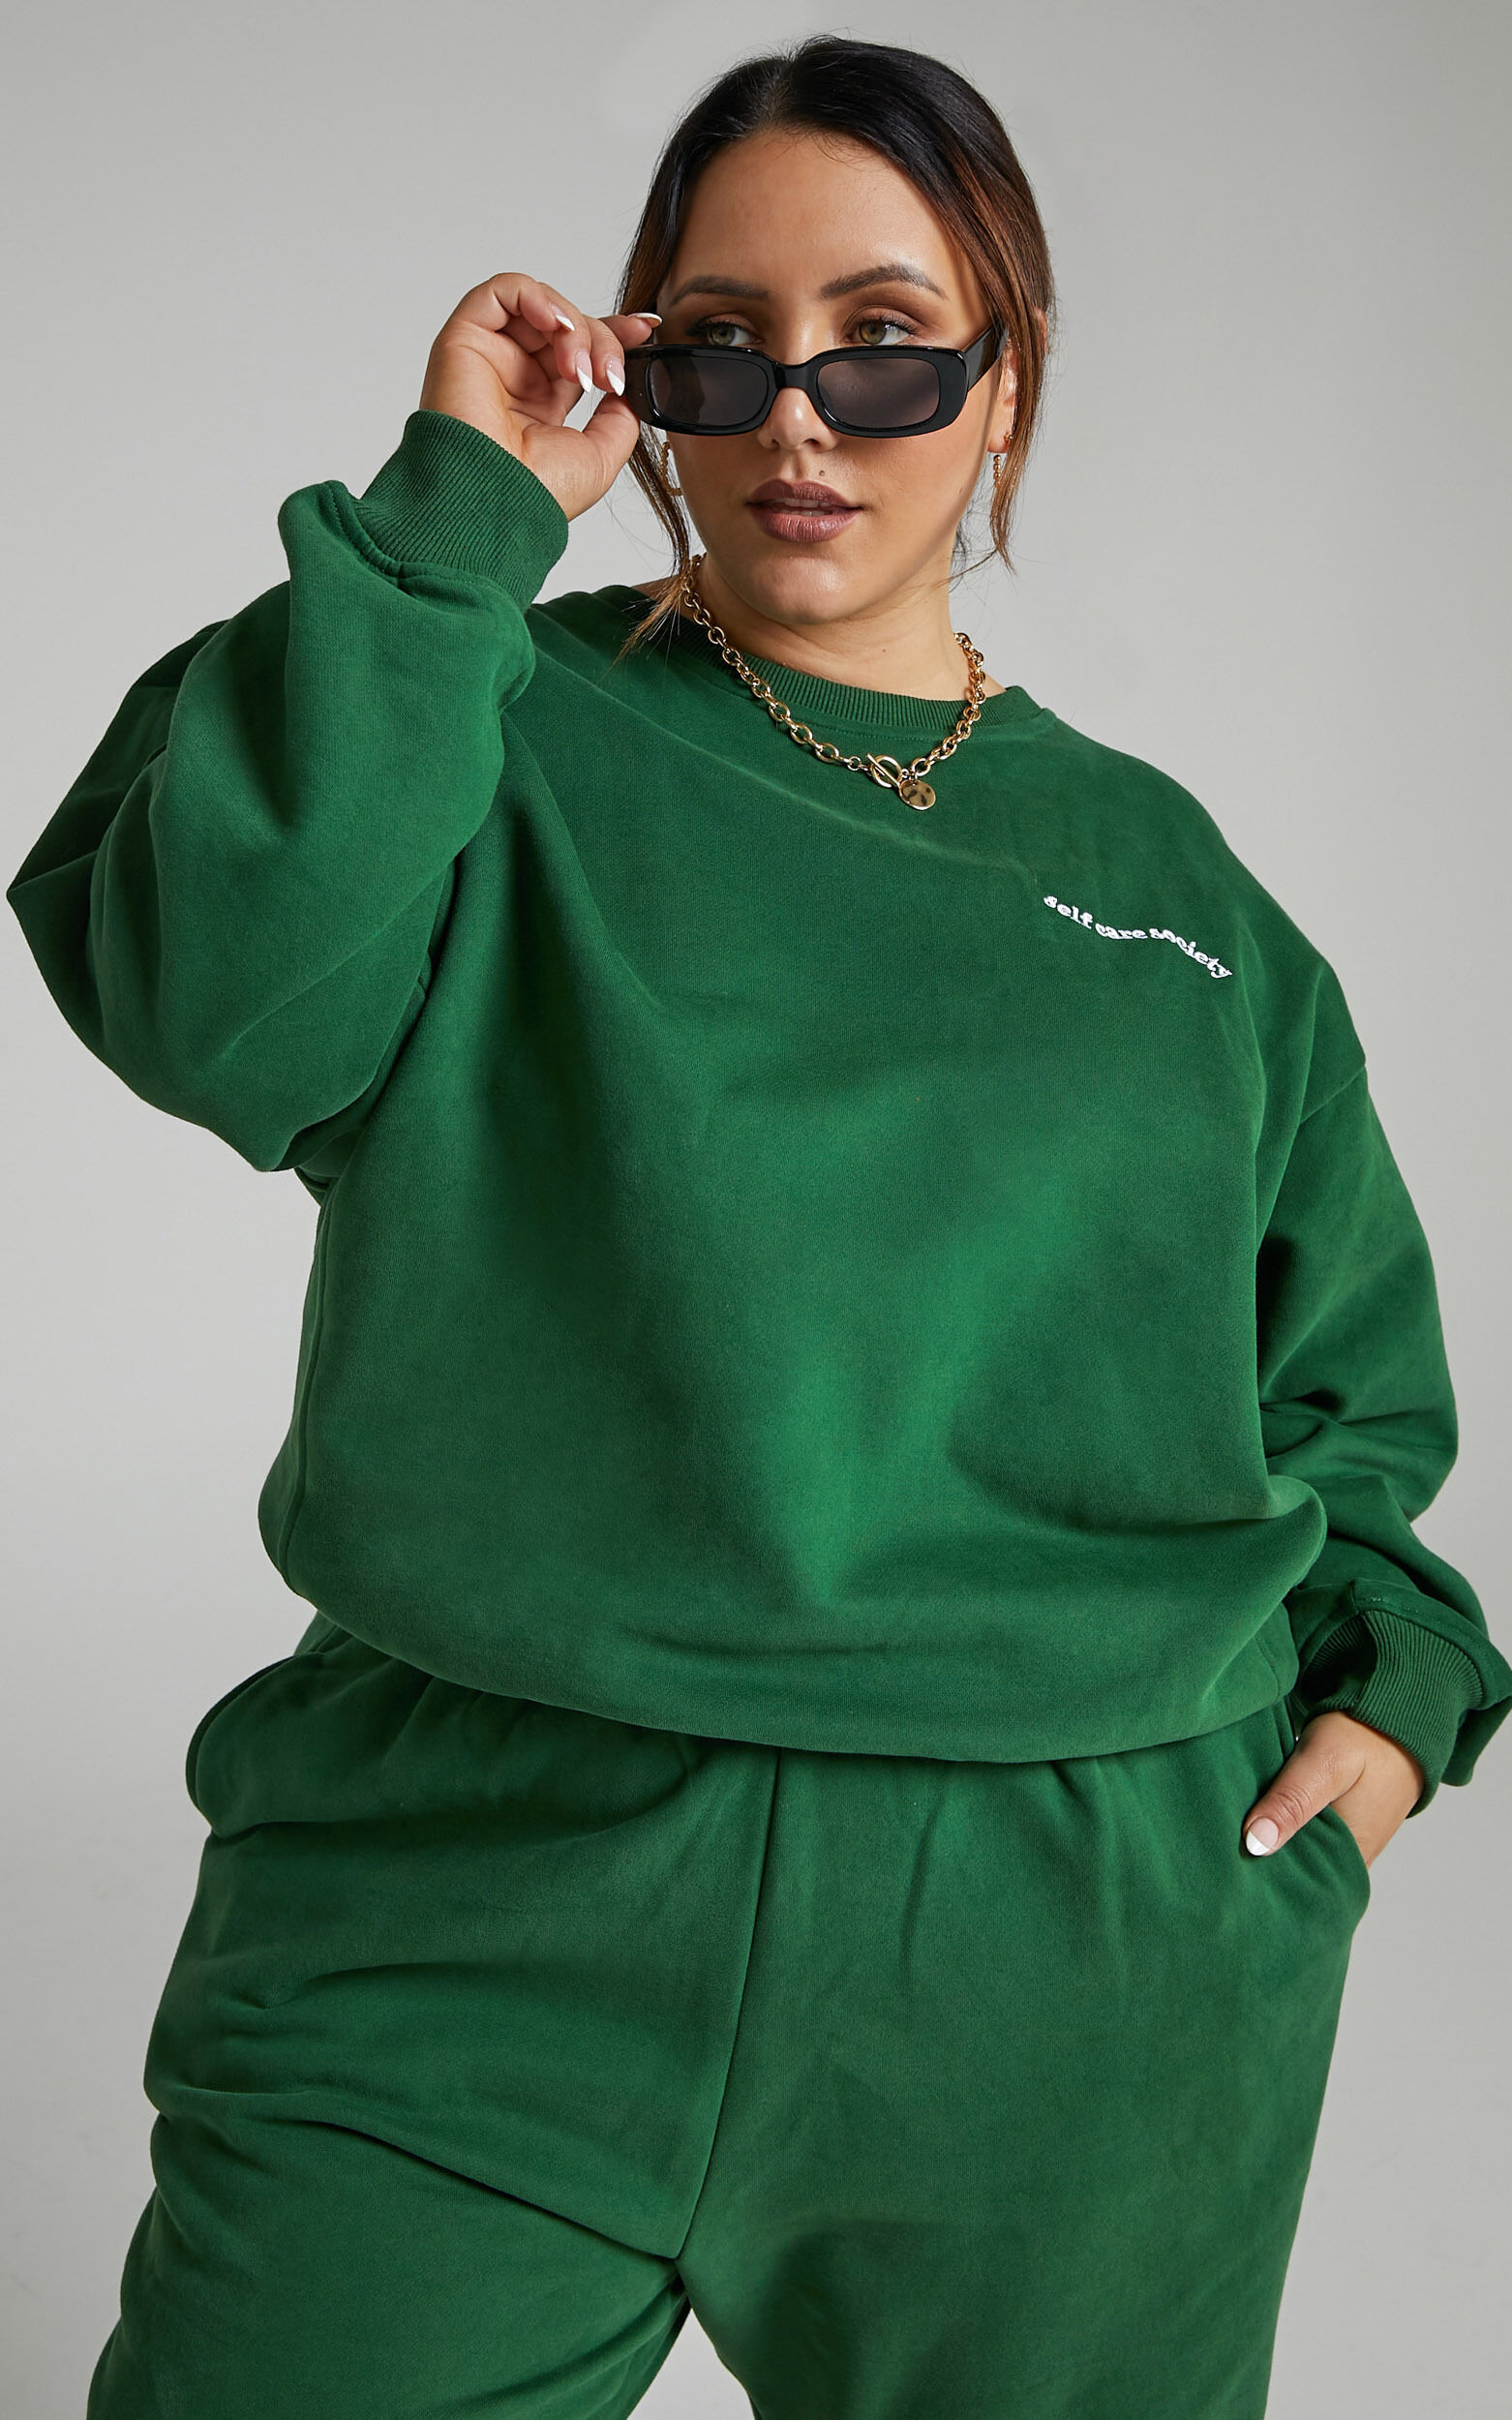 Sunday Society Club - Gael Sweatshirt in Green - 04, GRN2, super-hi-res image number null